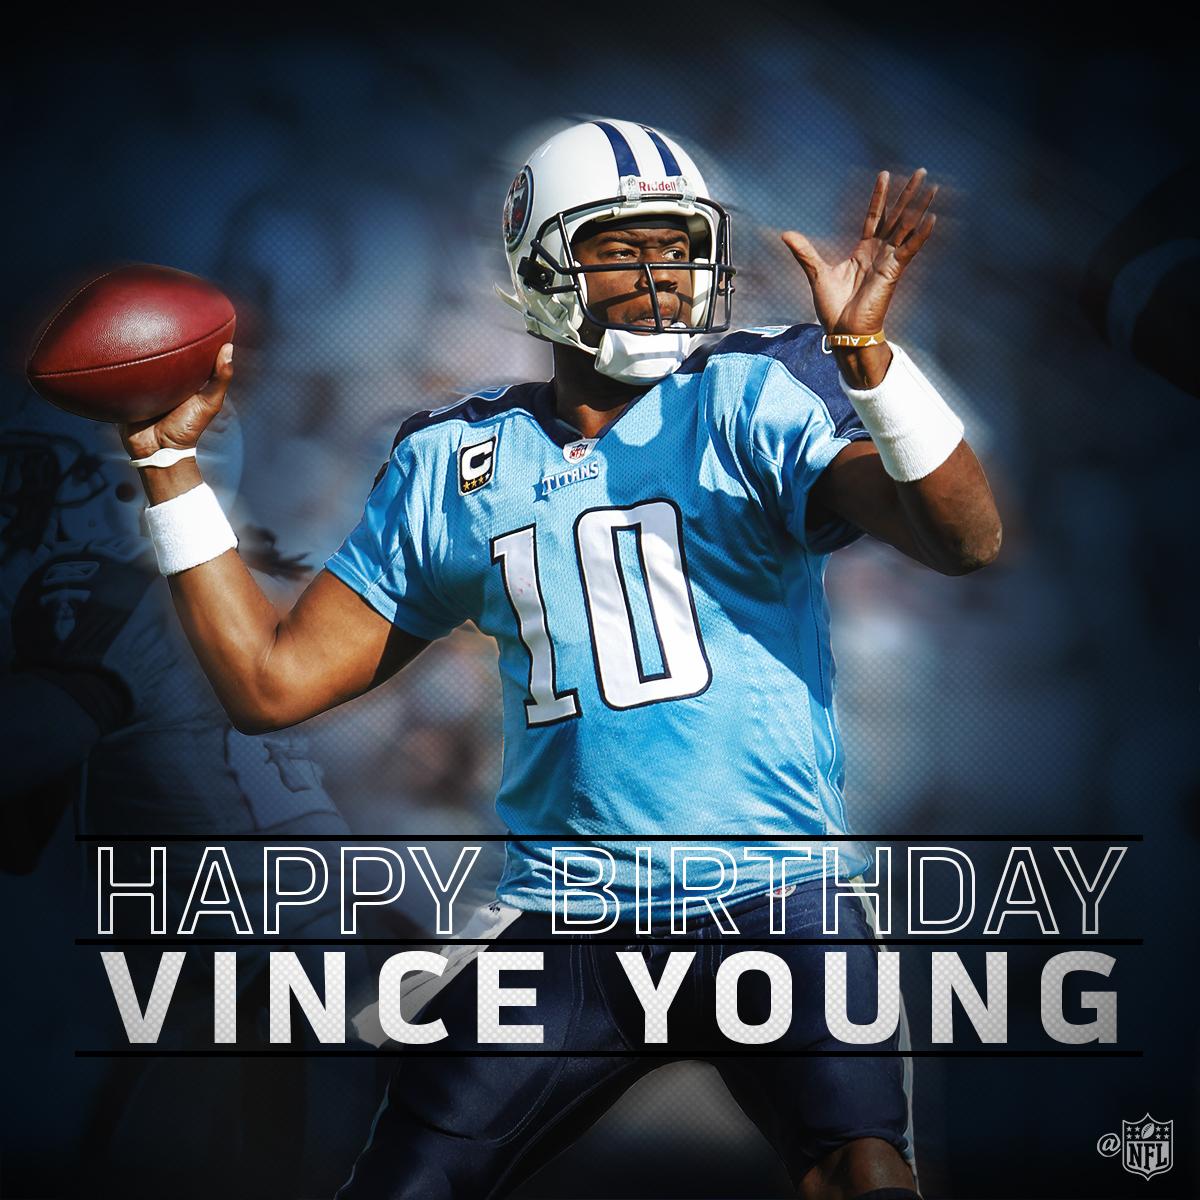 Join us in wishing Vince Young a Happy 34th Birthday! 